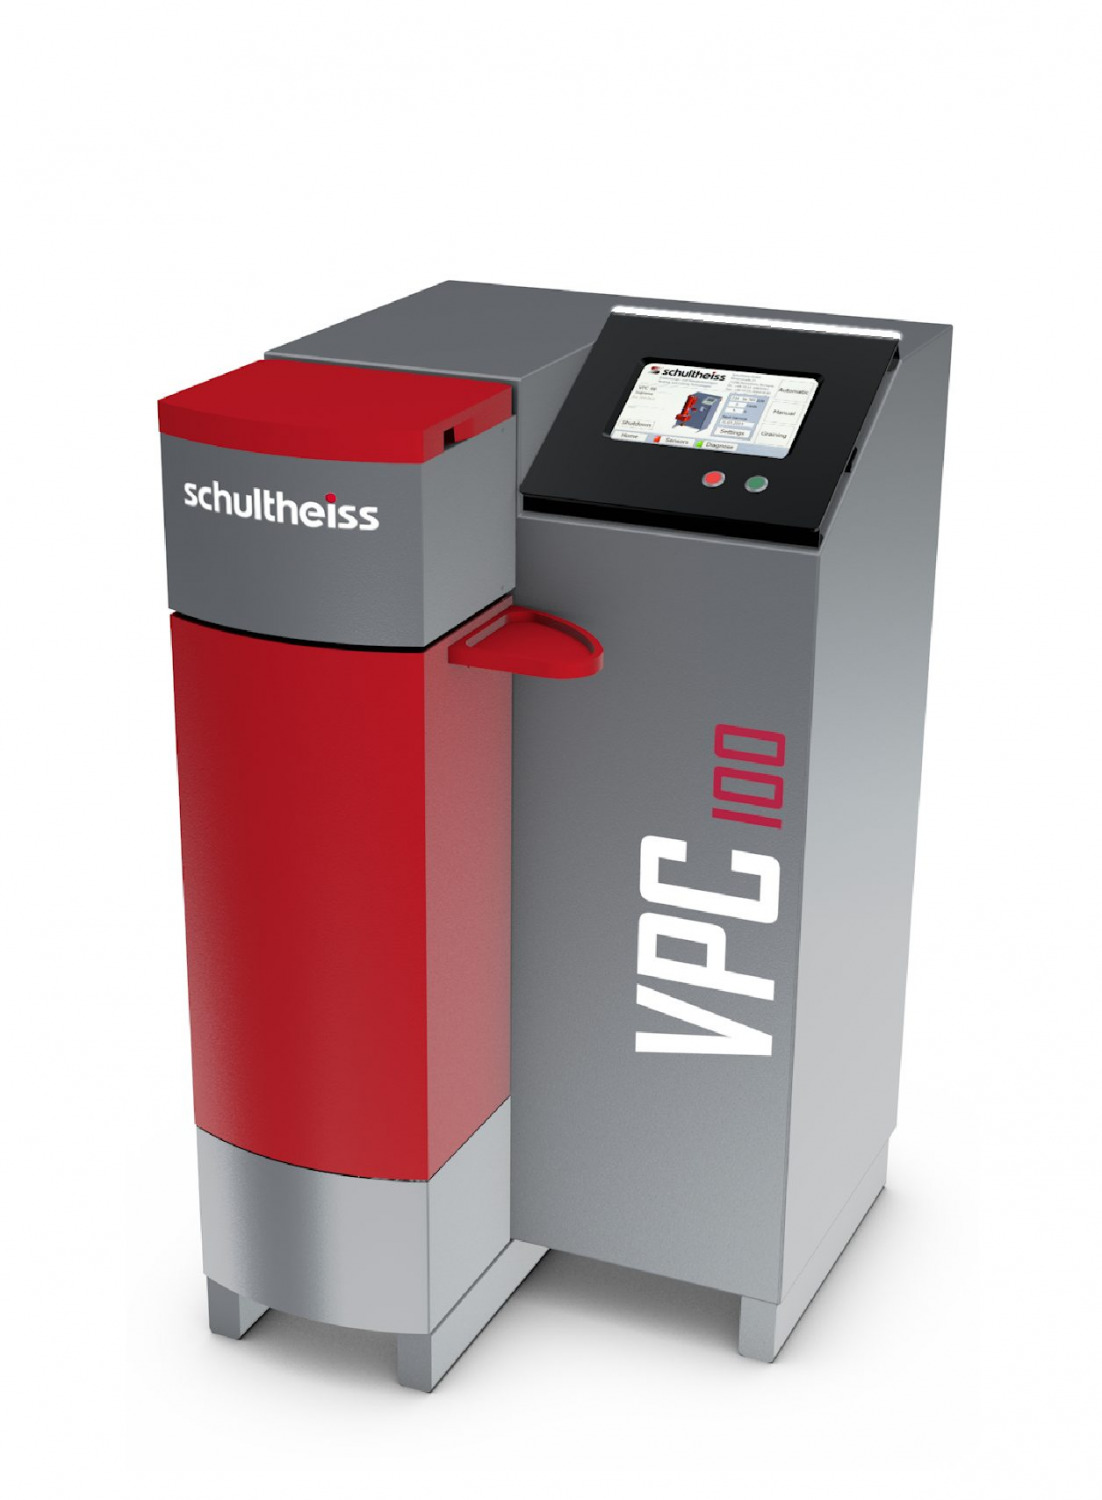 Image of the VPC 100 casting printer